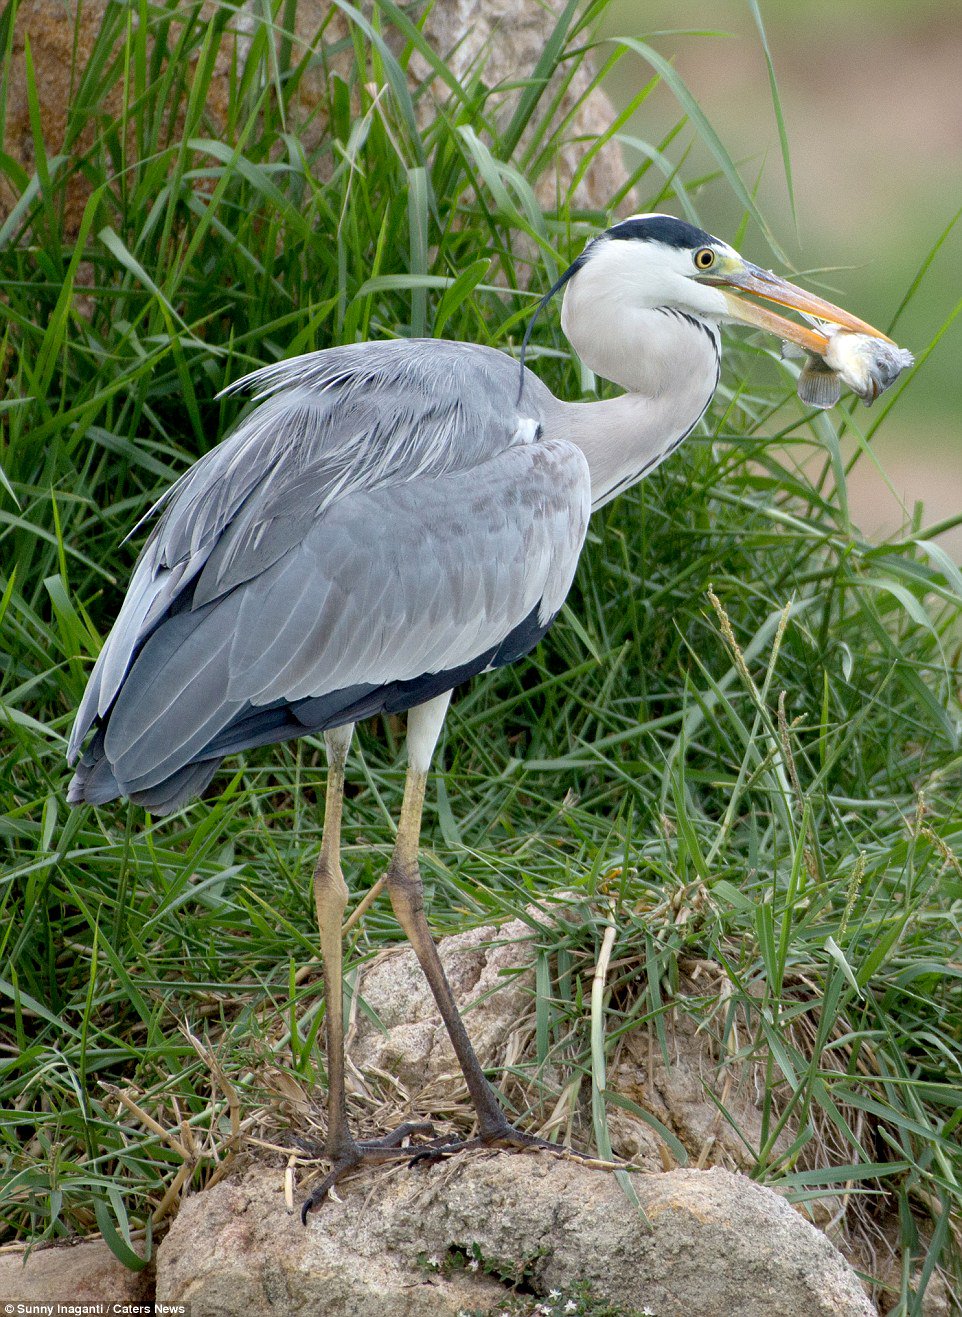 A Fishy Fight: Heron and Snake Clash in a Battle for Survival - Sporting ABC